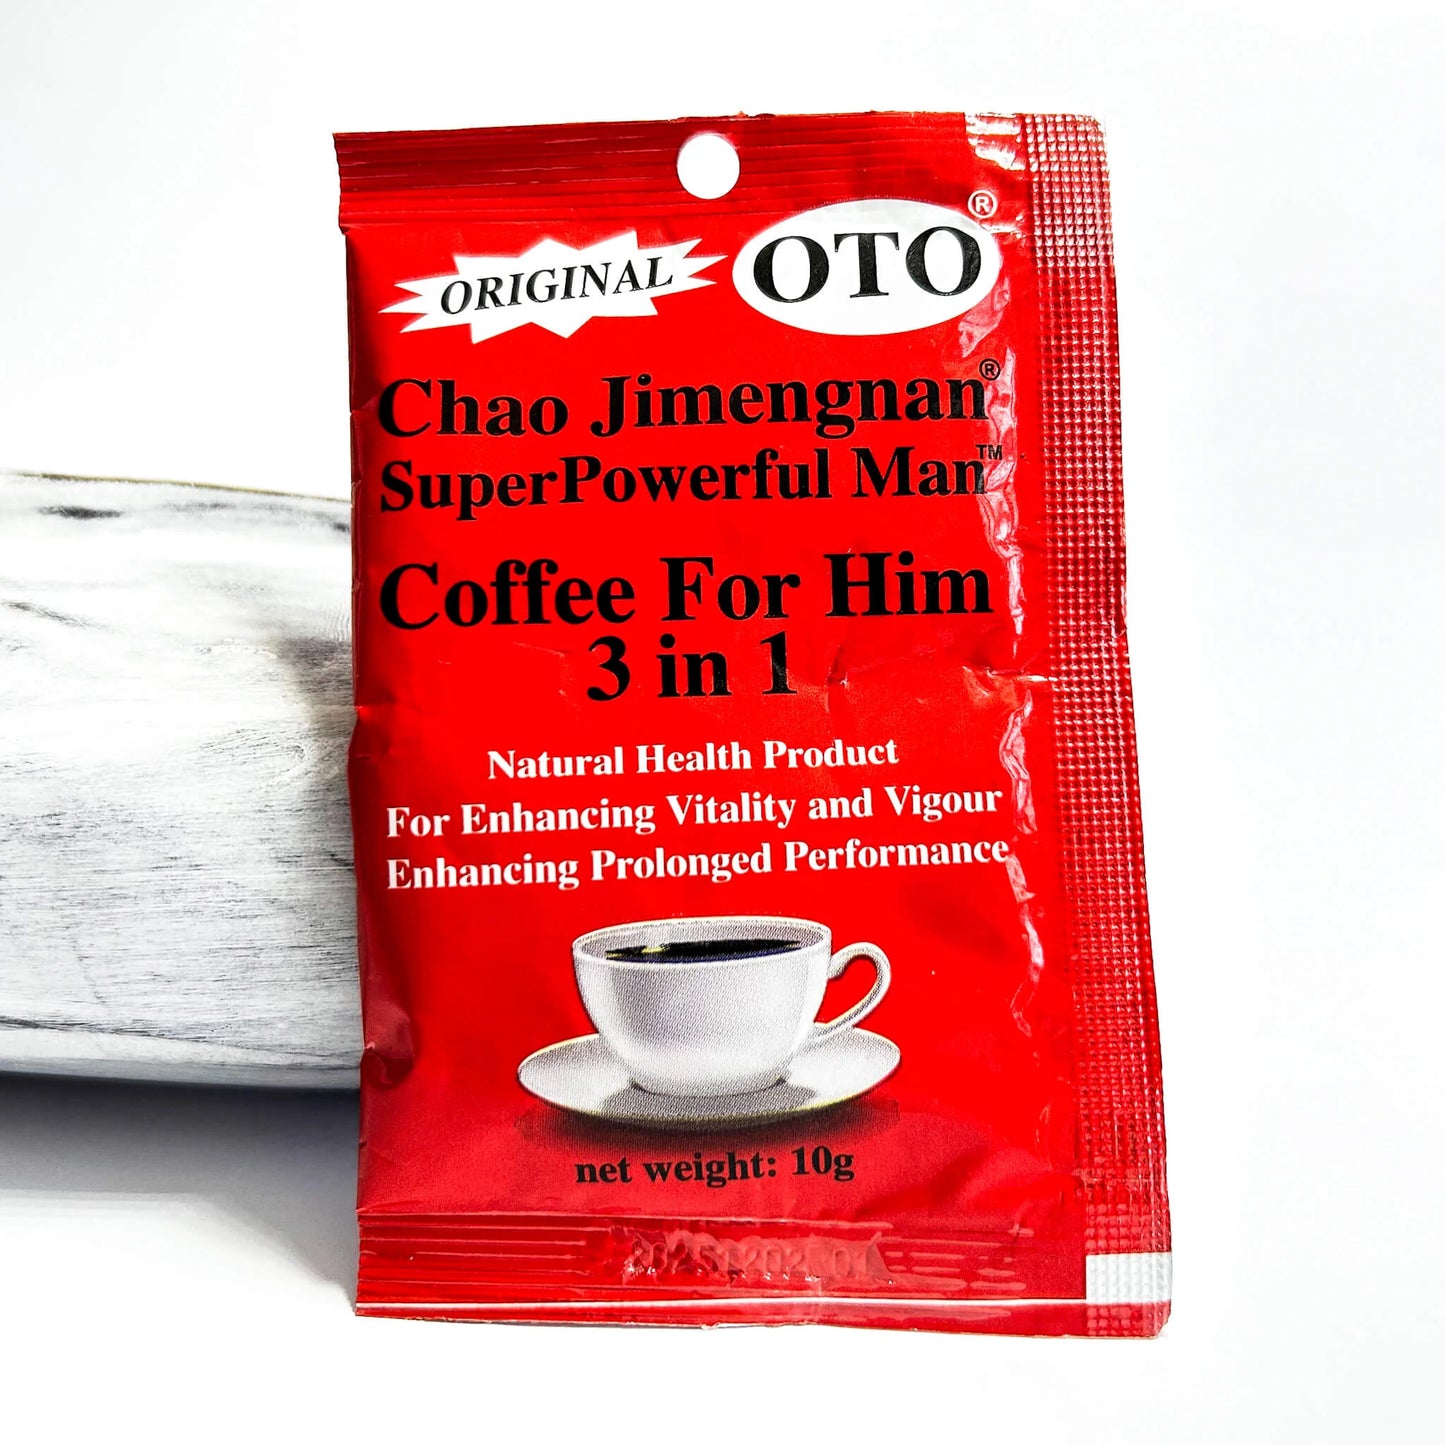 OTO Chao Jimengnan Super Powerful 3 in 1 Coffee for Him